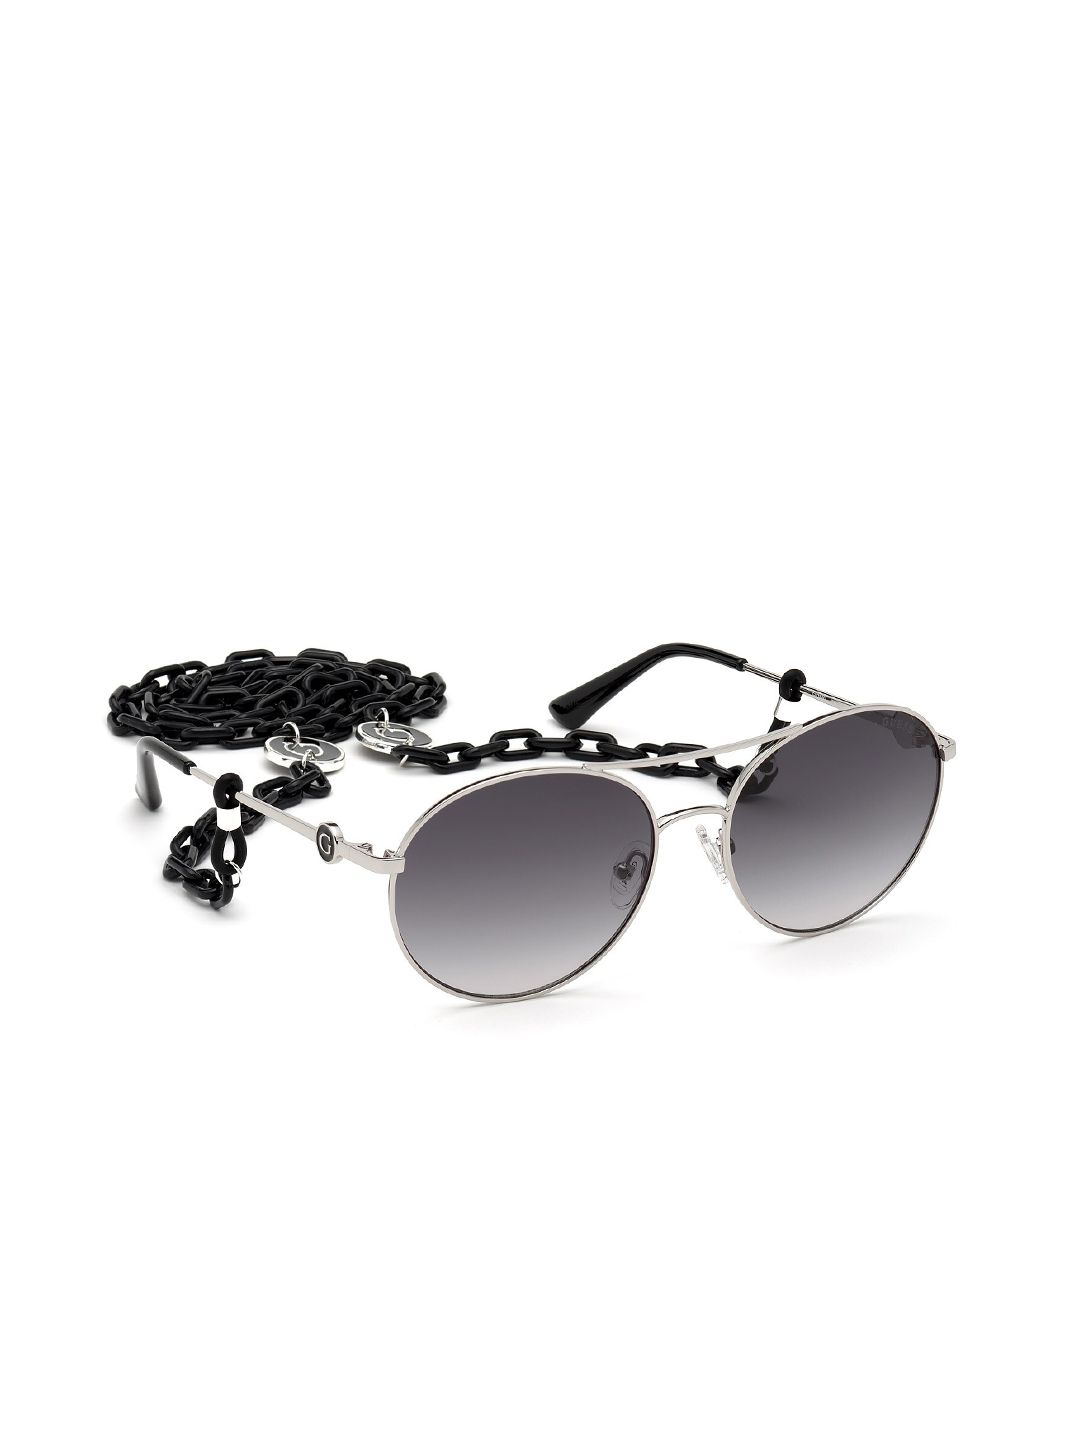 GUESS Women Grey Lens & Silver-Toned Aviator Sunglasses with UV Protected Lens Price in India